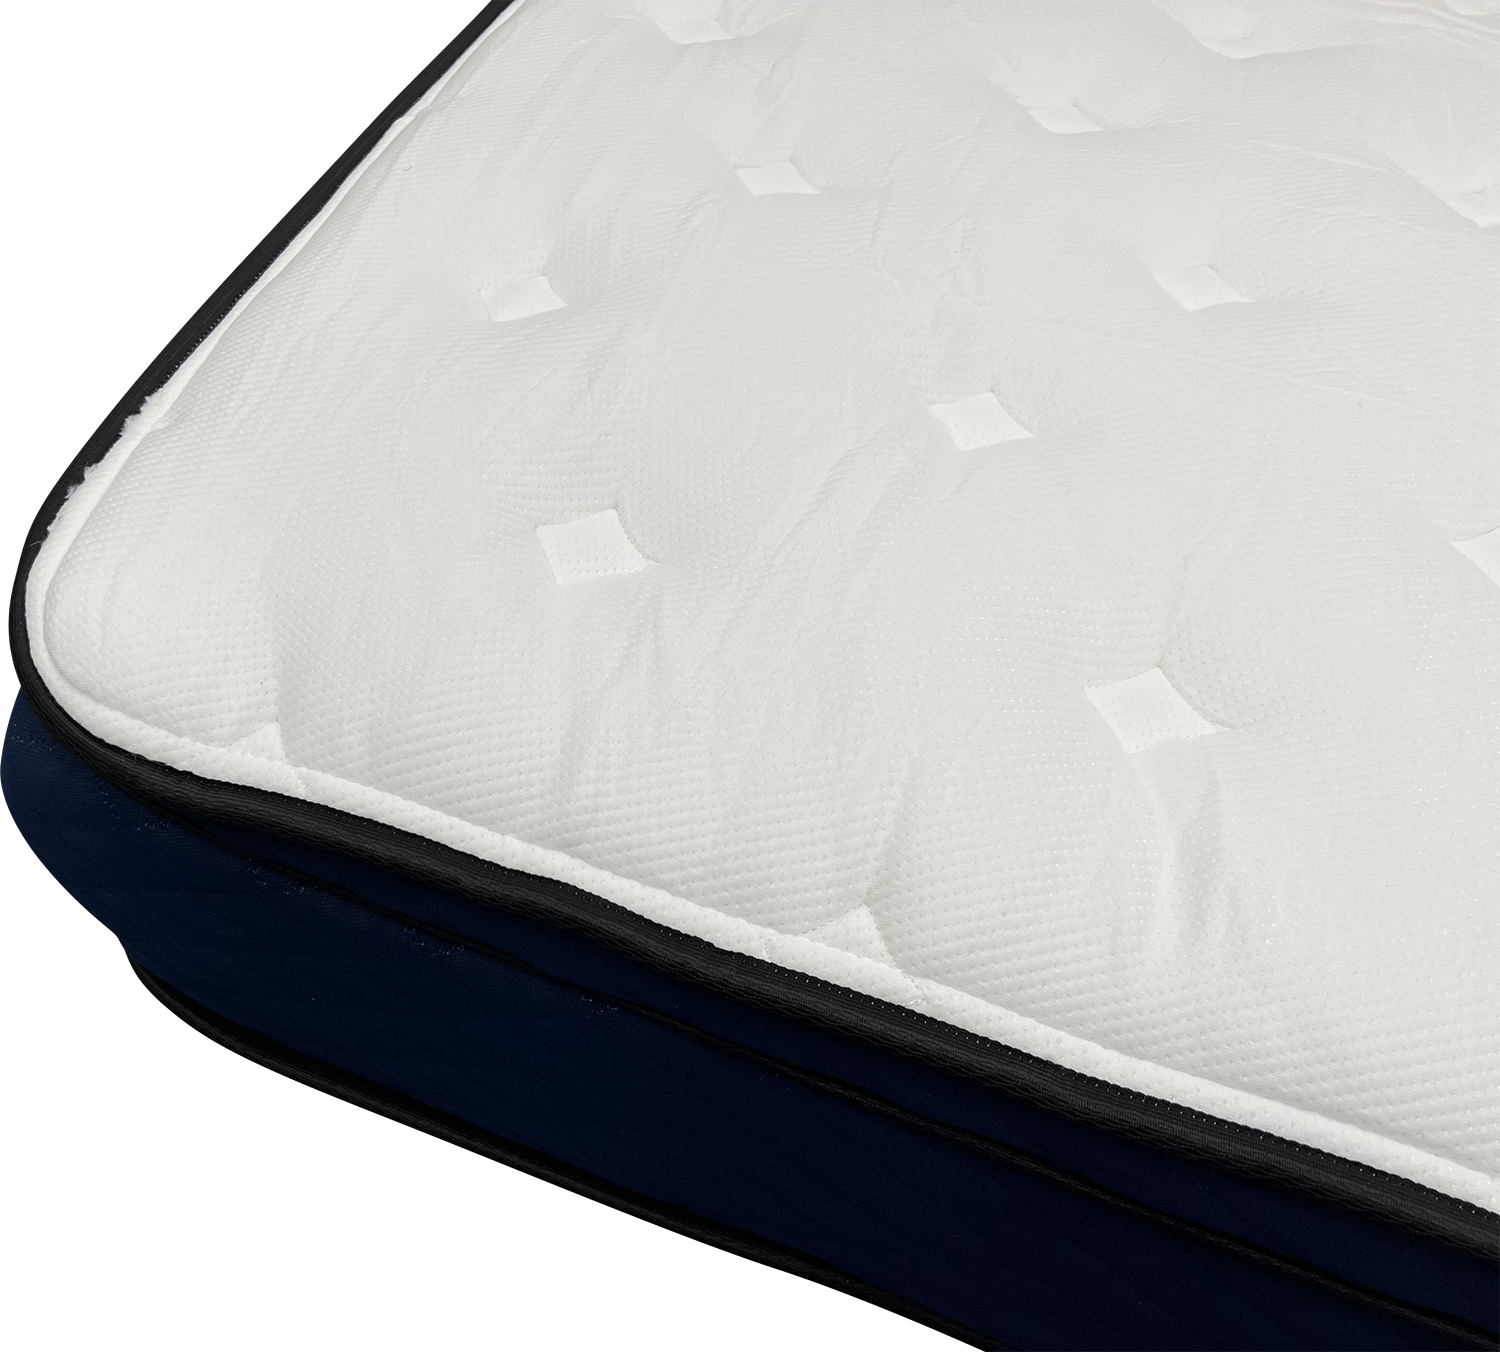 Image of the Silk and Snow Hybrid mattress out of its box.